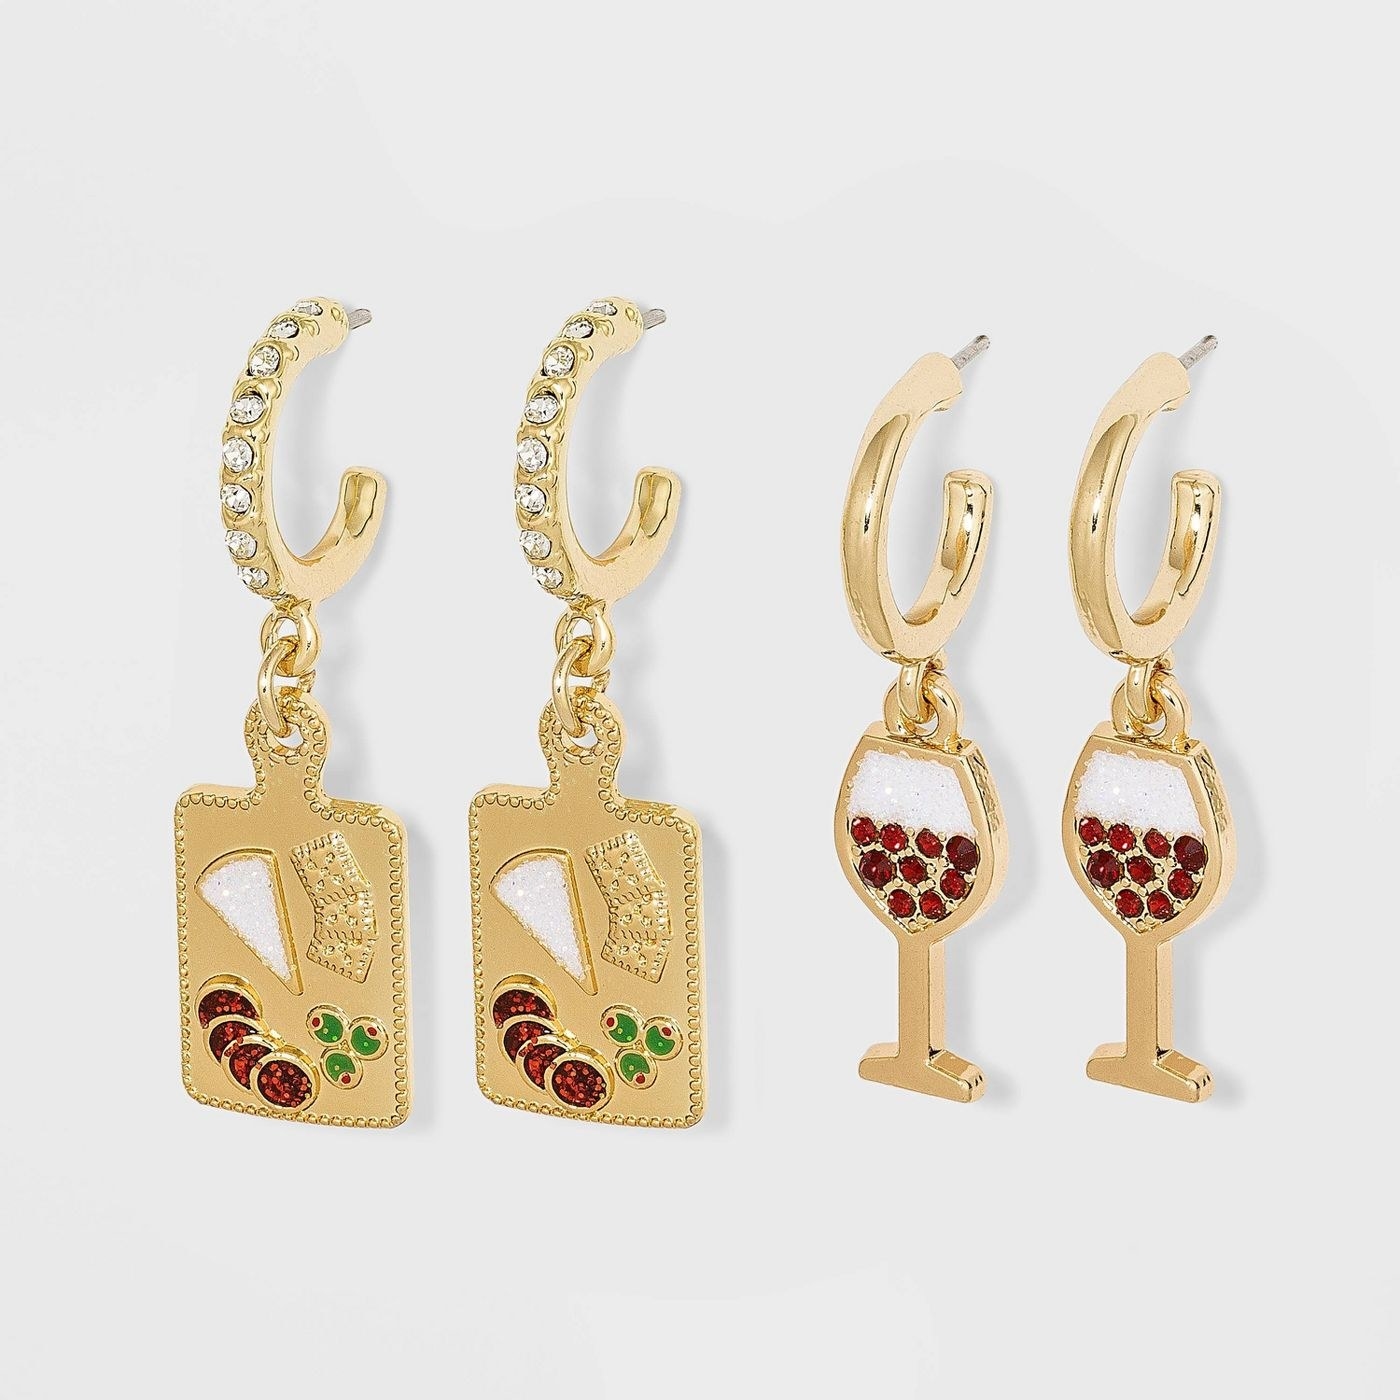 two pairs of gold huggie hoops with charms that look like a cheese board and wine glasses, respectively